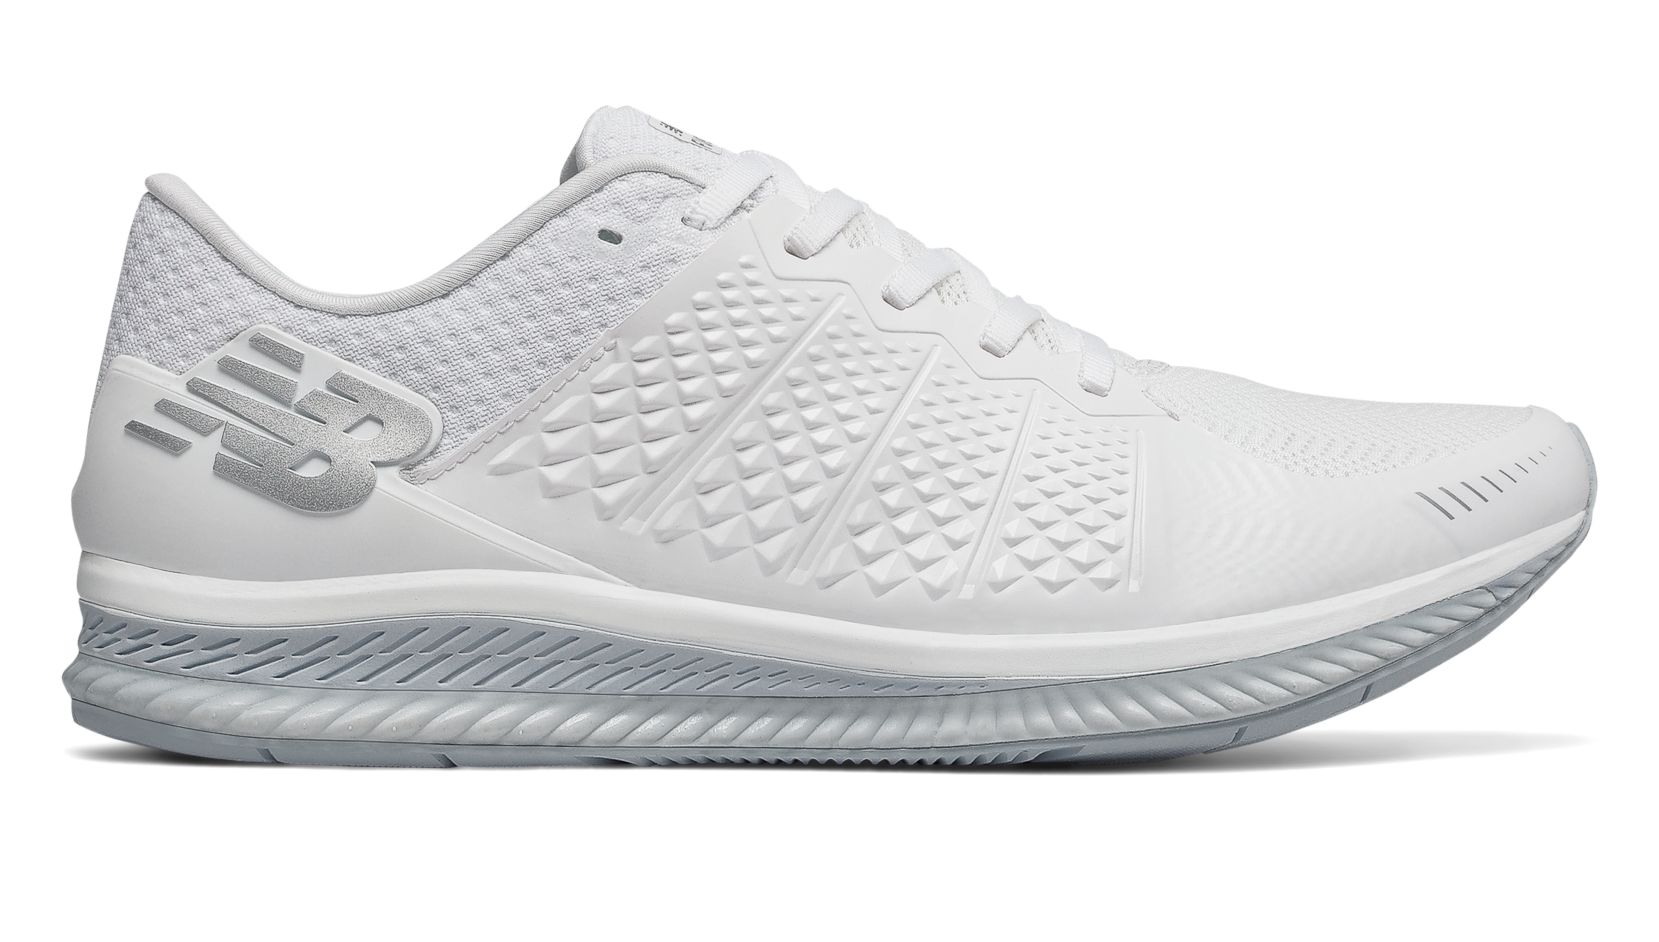 All-white running shoes, like your dad 